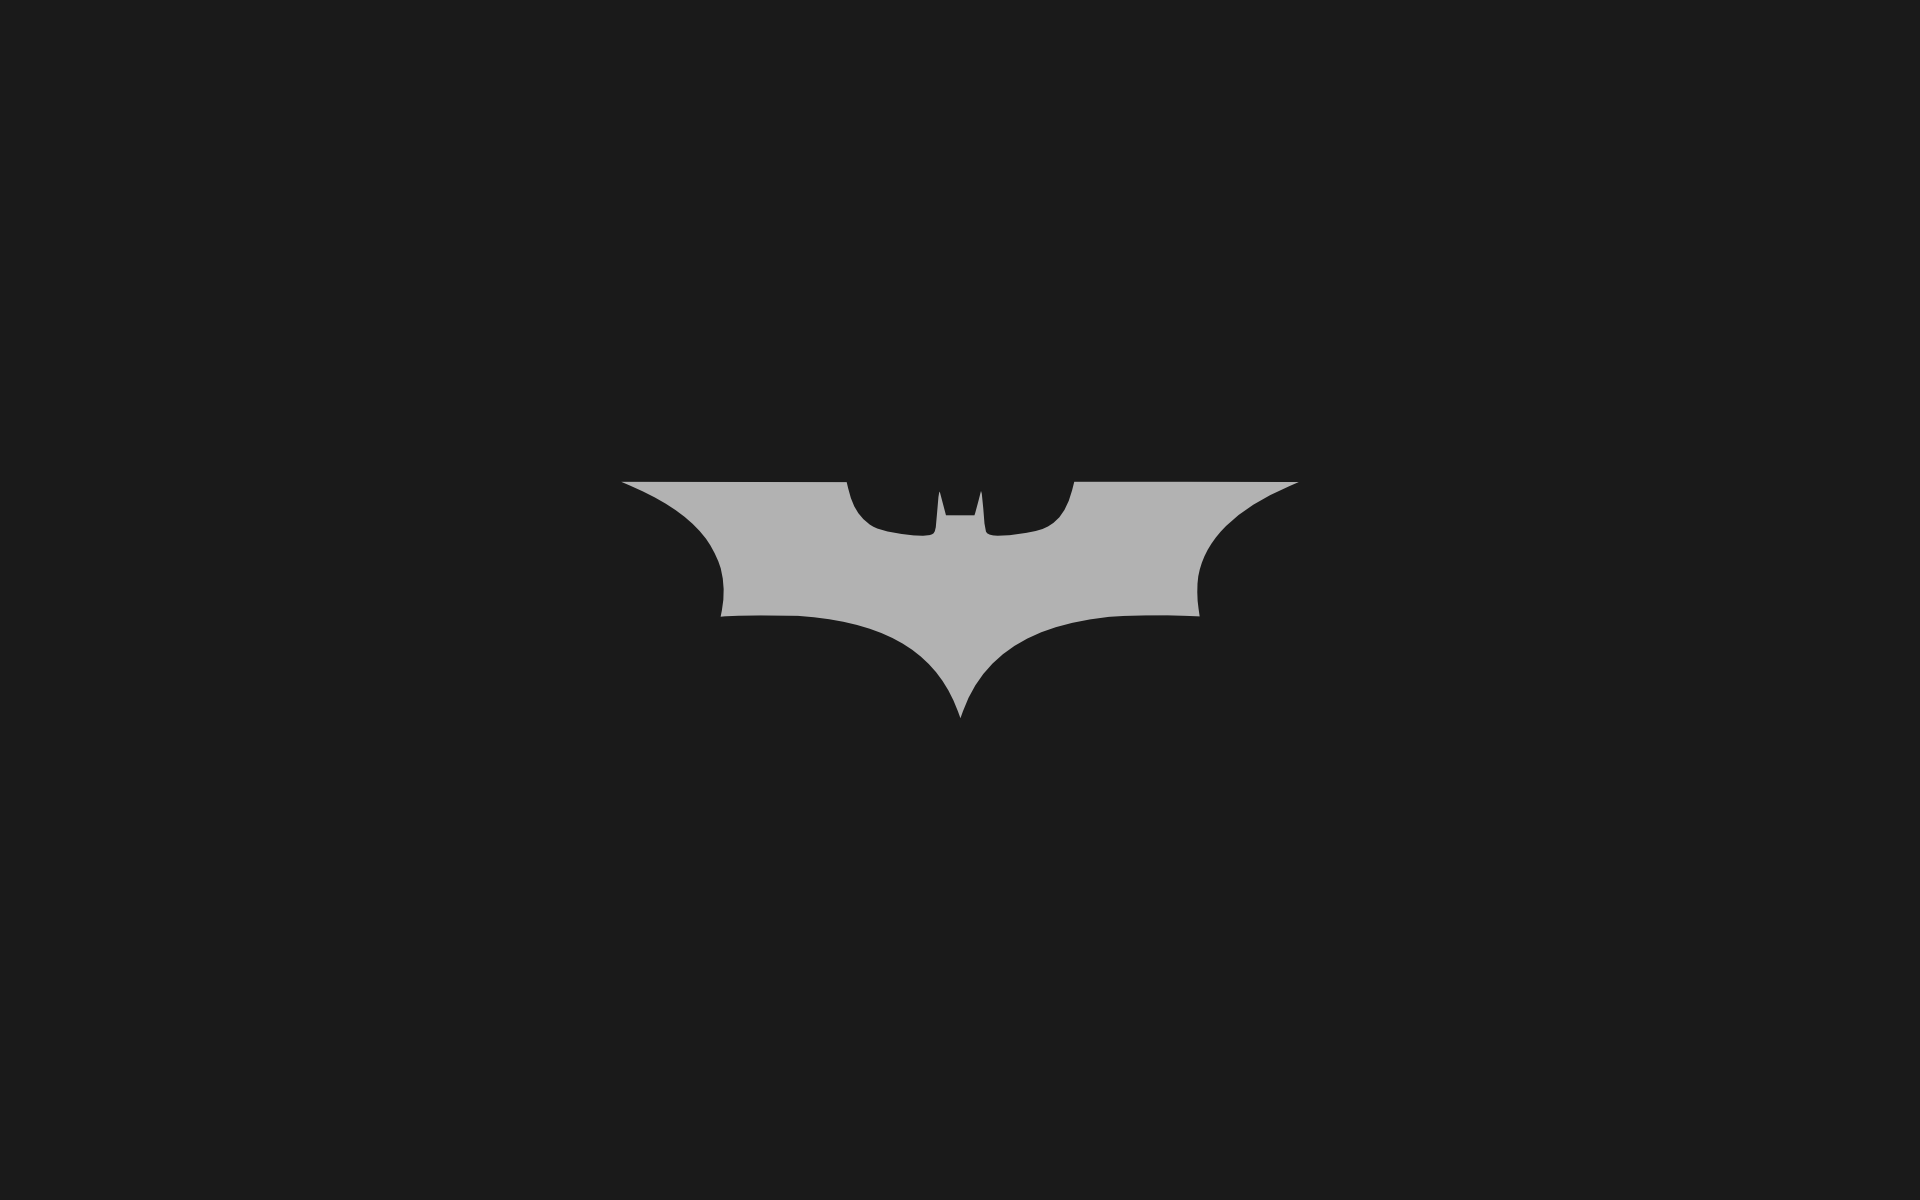 Gray Bat Logo - Gray bat on a black background wallpapers and images - wallpapers ...